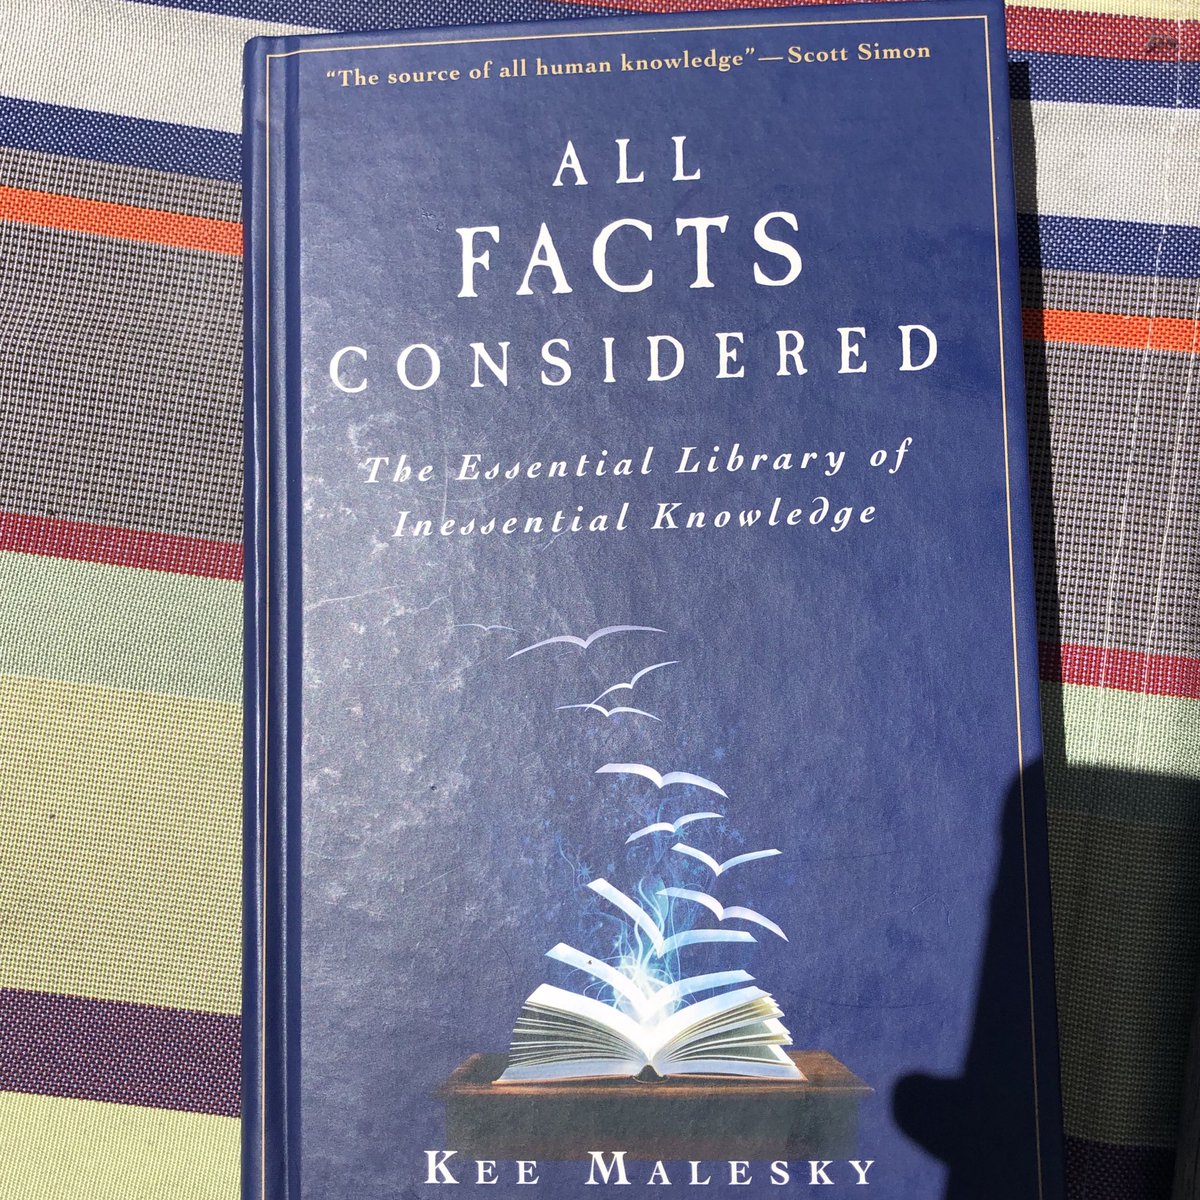 48/52All Facts Considered: The Essential Library of Inessential Knowledge by Kee Malesky. About a decade ago, I bought this book written by an NPR librarian in which she compiles research conducted as part of her work. #52booksin52weeks  #2020books  #booksof2020  #pandemicreading